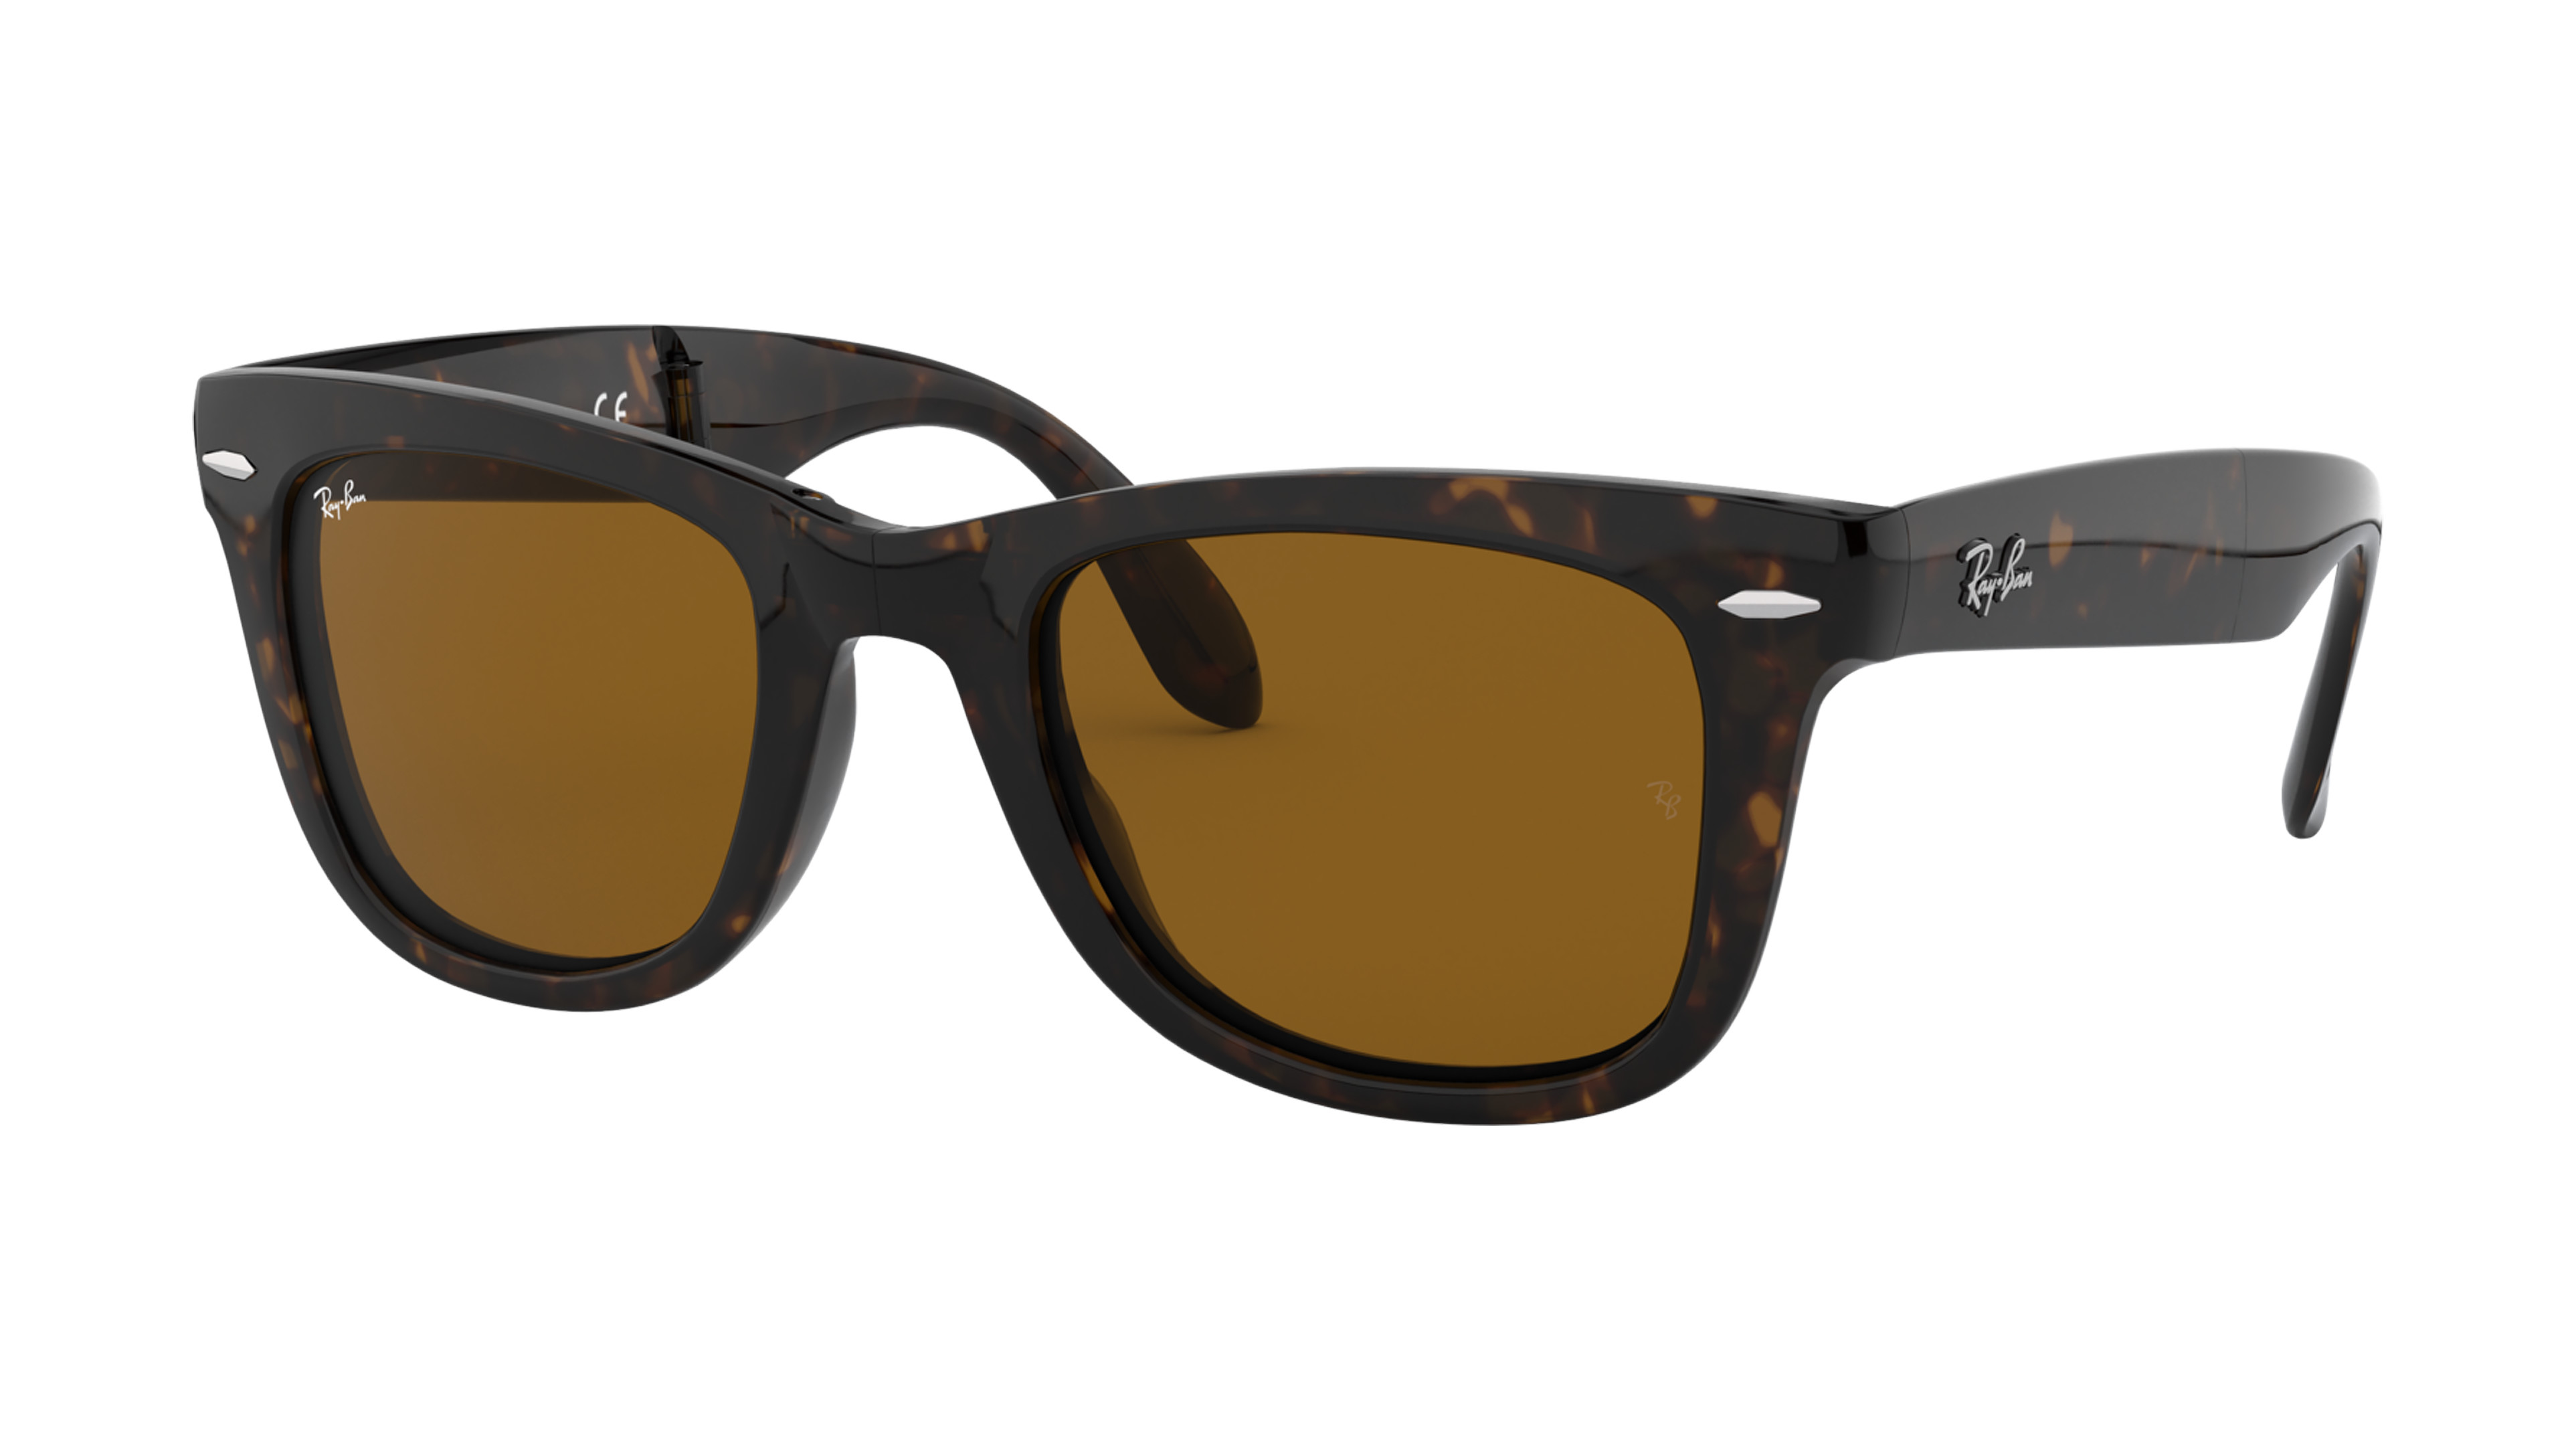 [products.image.angle_left01] Ray-Ban FOLDING WAYFARER 0RB4105 710 Sonnenbrille